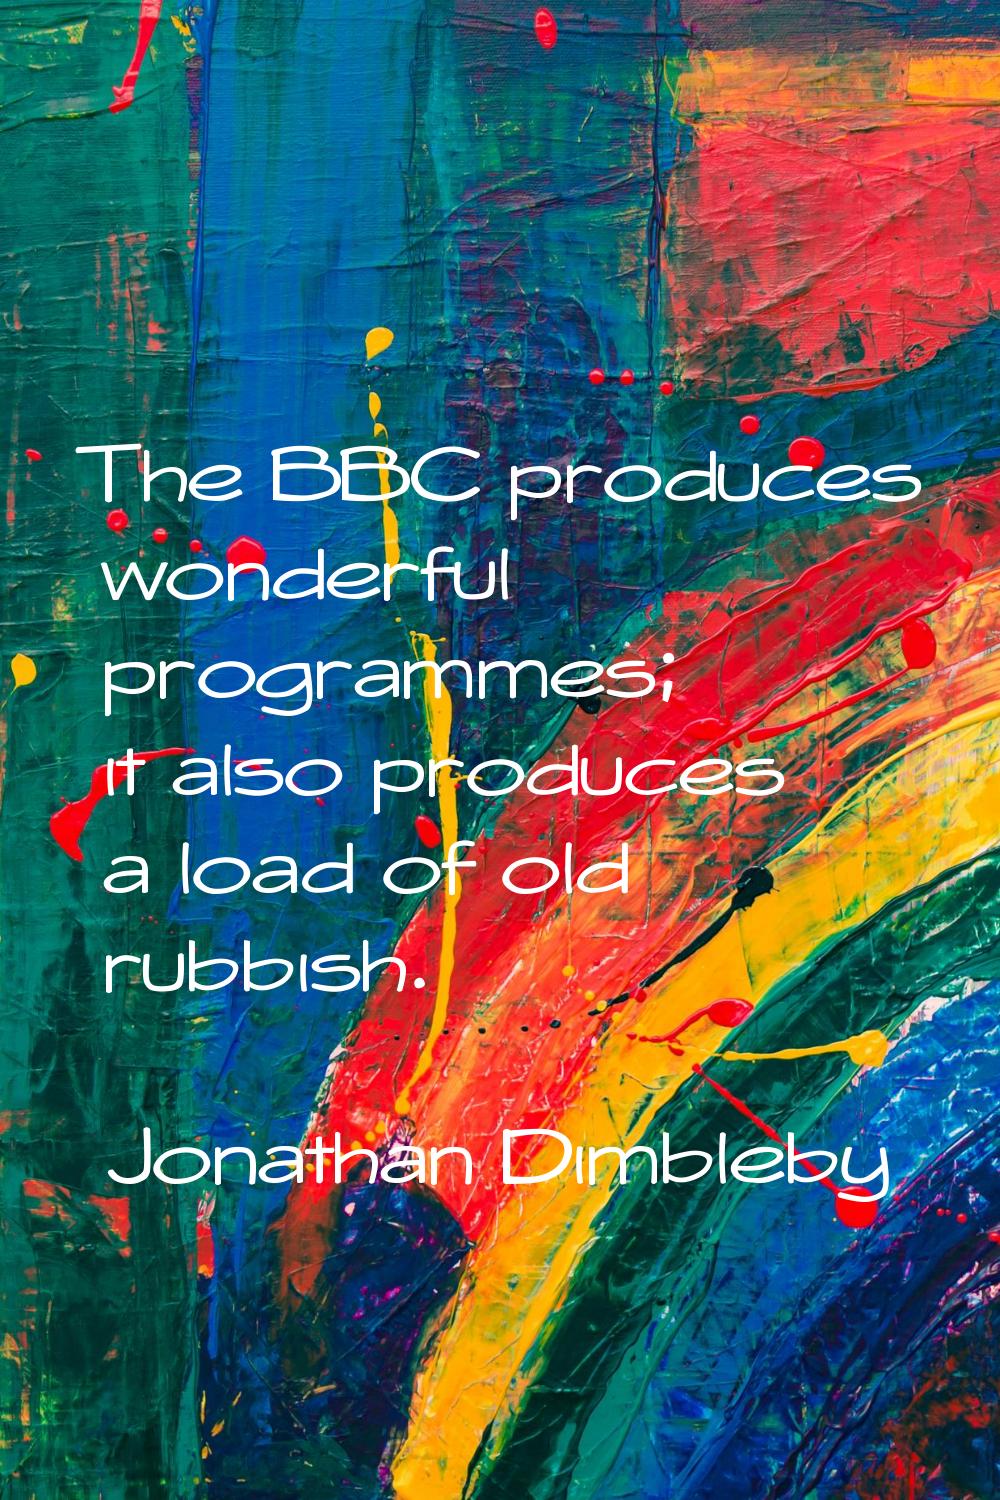 The BBC produces wonderful programmes; it also produces a load of old rubbish.